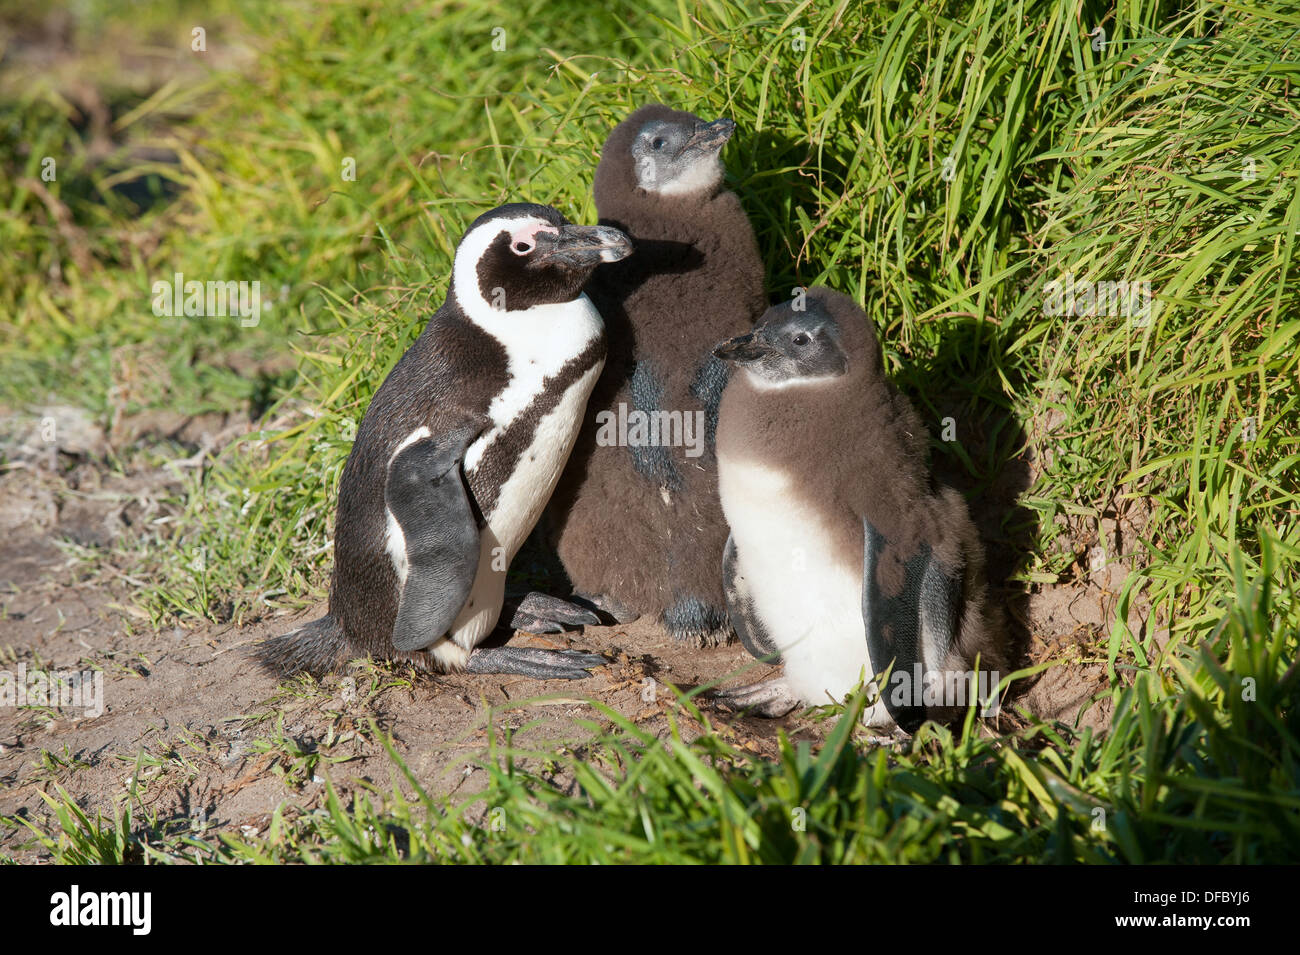 African pinguin (Spheniscus demersus) adult with juveniles molting into adult plumage, Simon's Town, Western Cape, South Africa Stock Photo